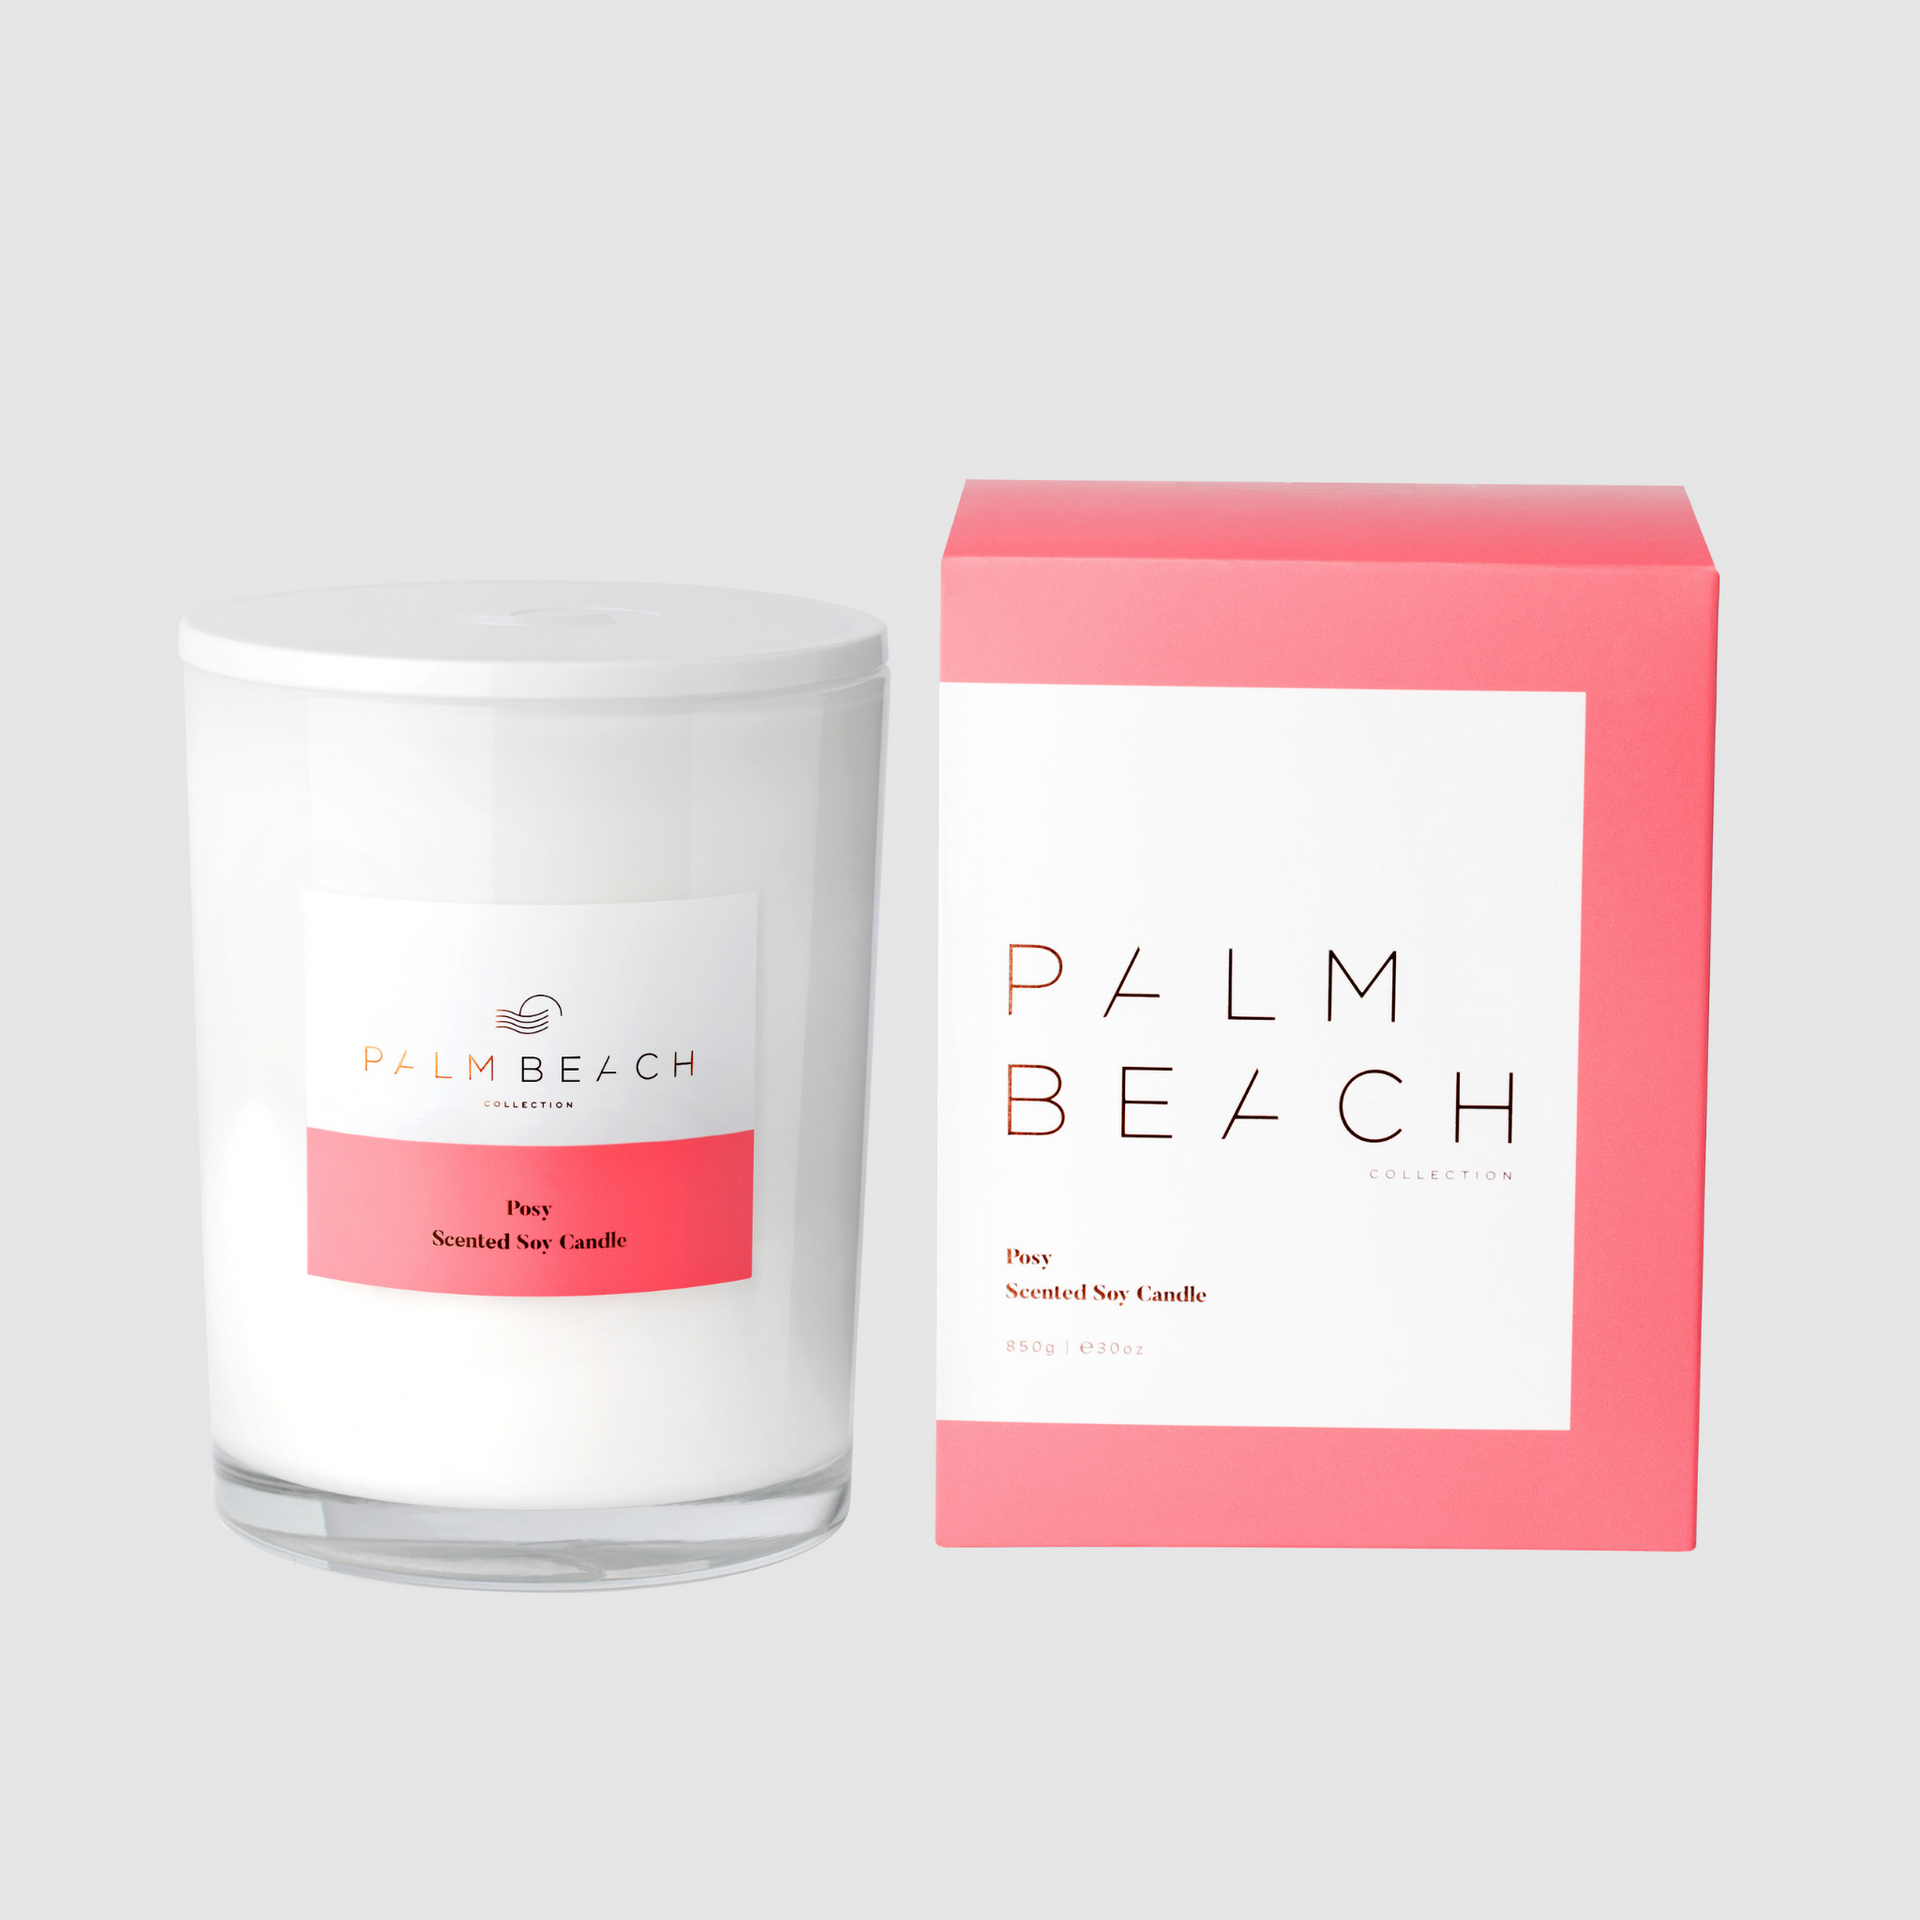 Posy <br> 850g Deluxe Candle